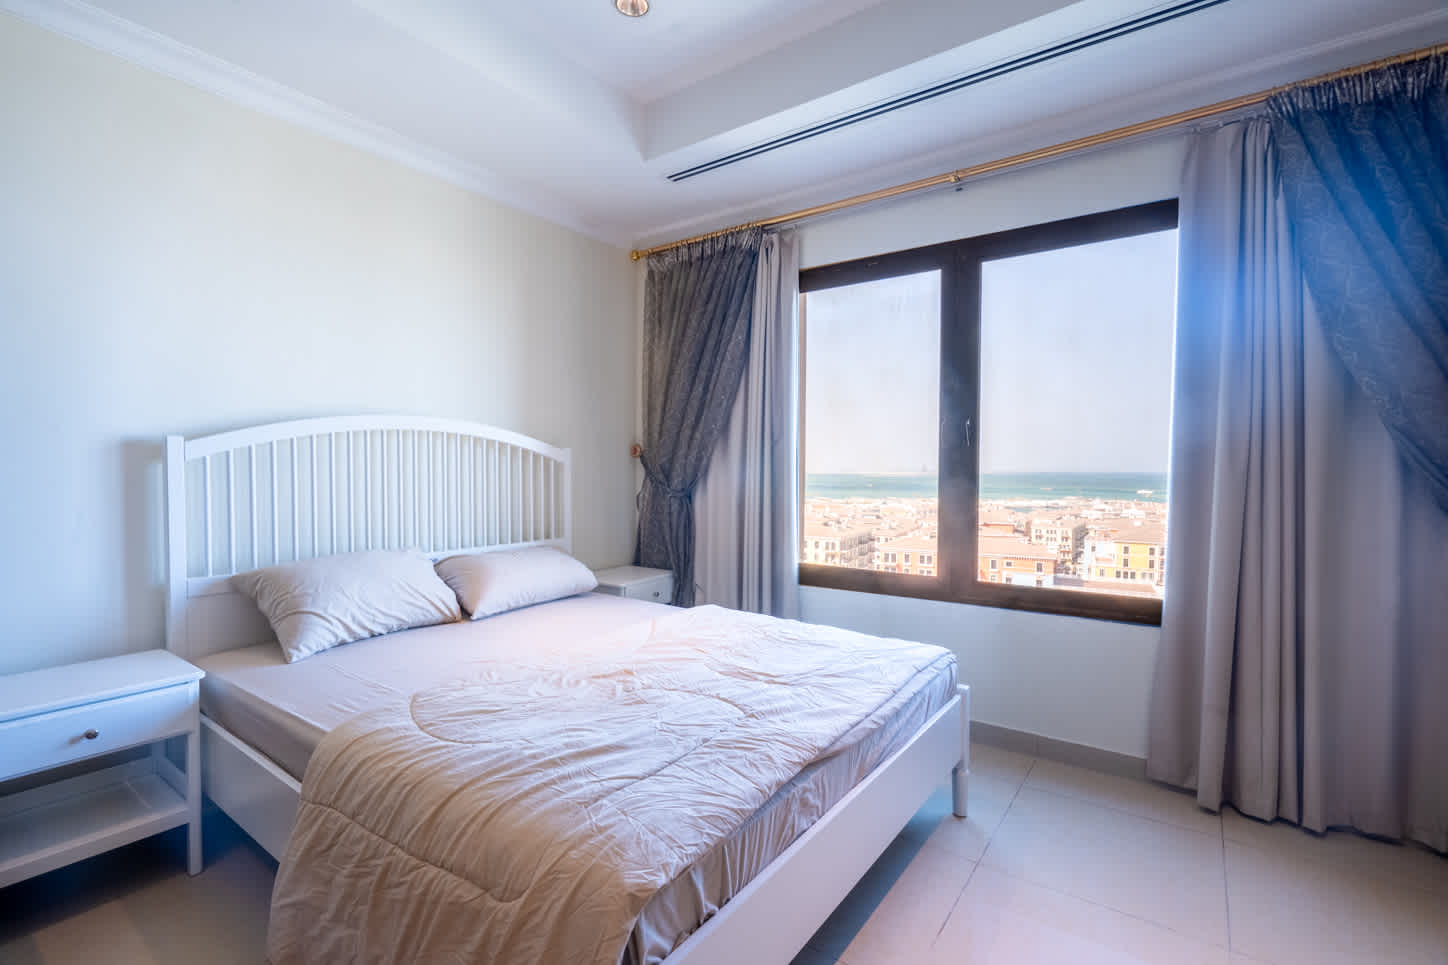 25 Spaces Real Estate - Porto Arabia - Properties for Rent - 16 March 2023 refWAPT258066 (8)